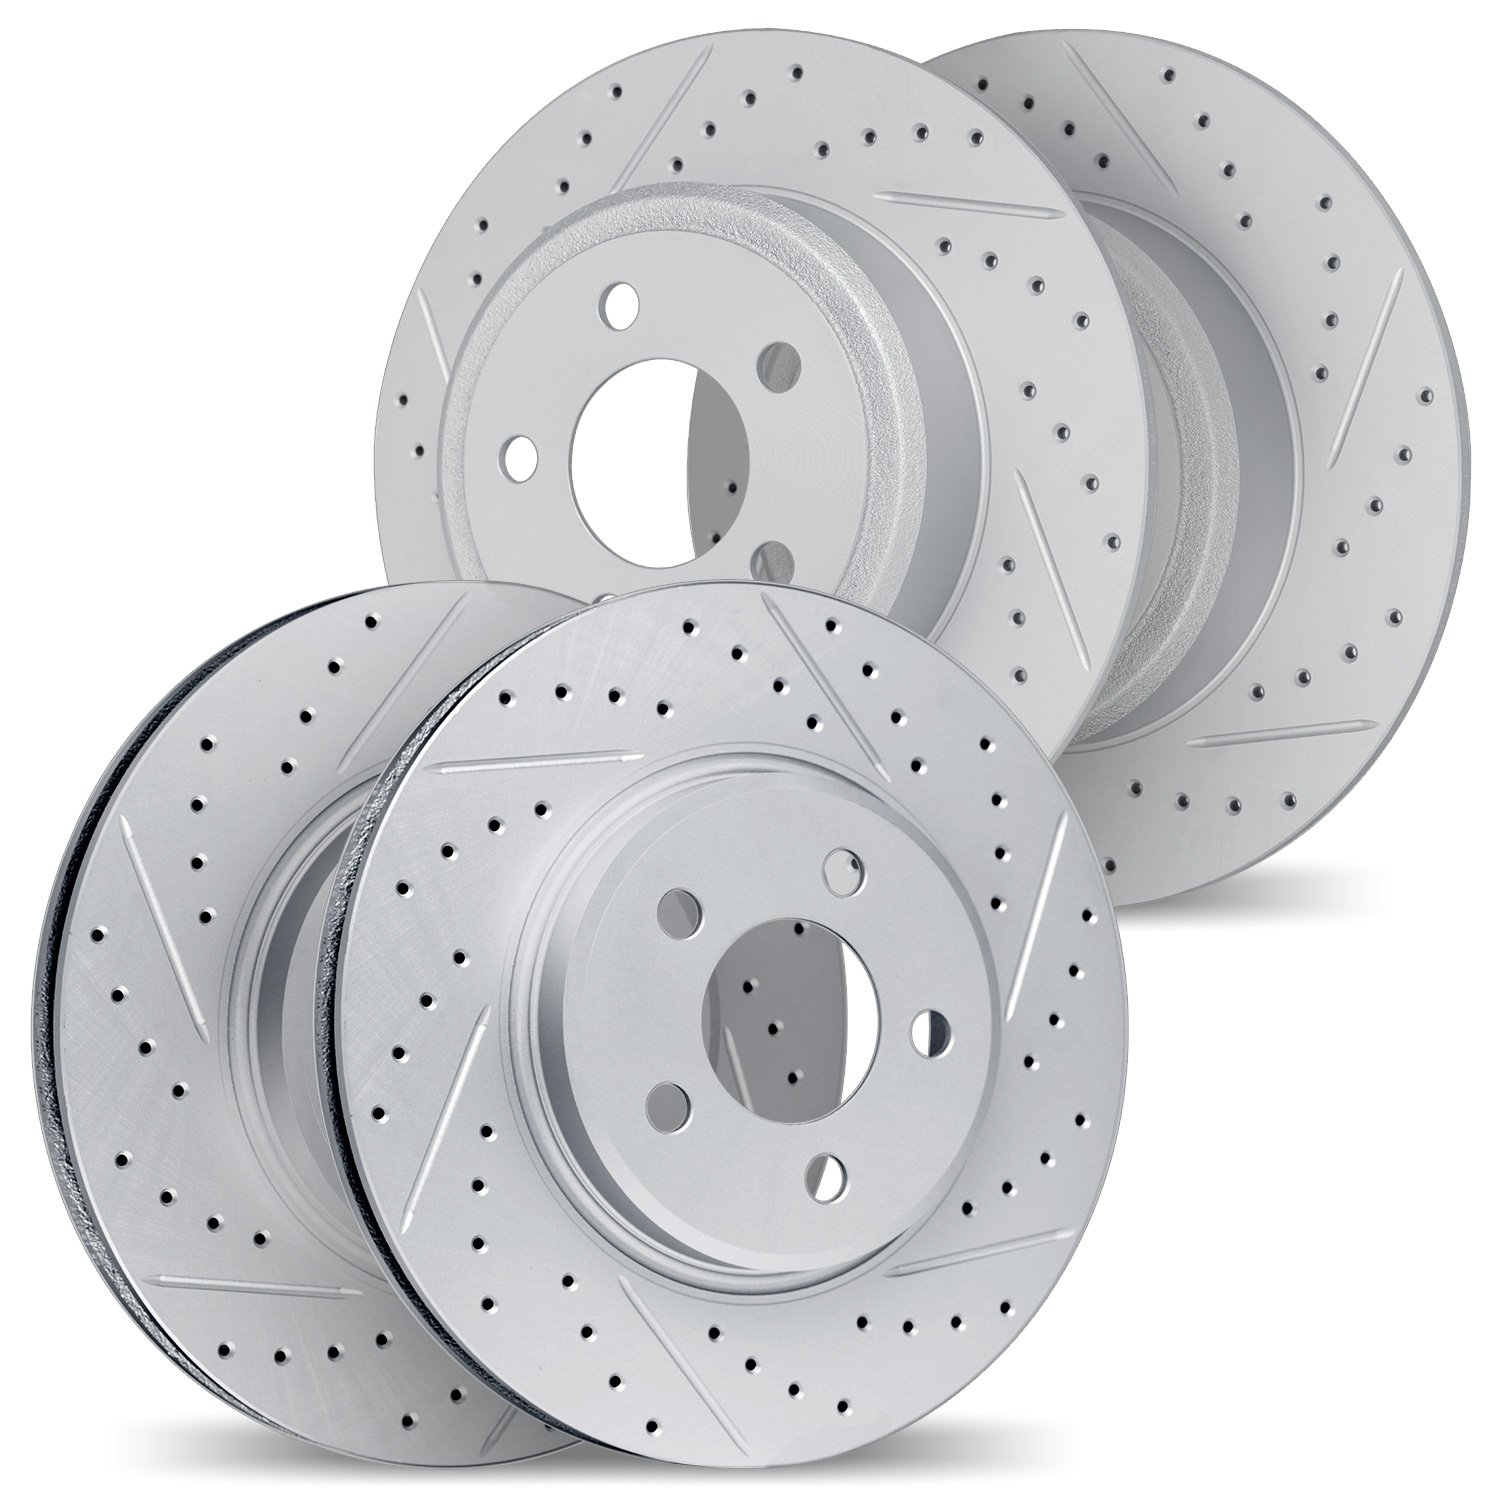 2004-59069 Geoperformance Drilled/Slotted Brake Rotors, Fits Select Acura/Honda, Position: Front and Rear